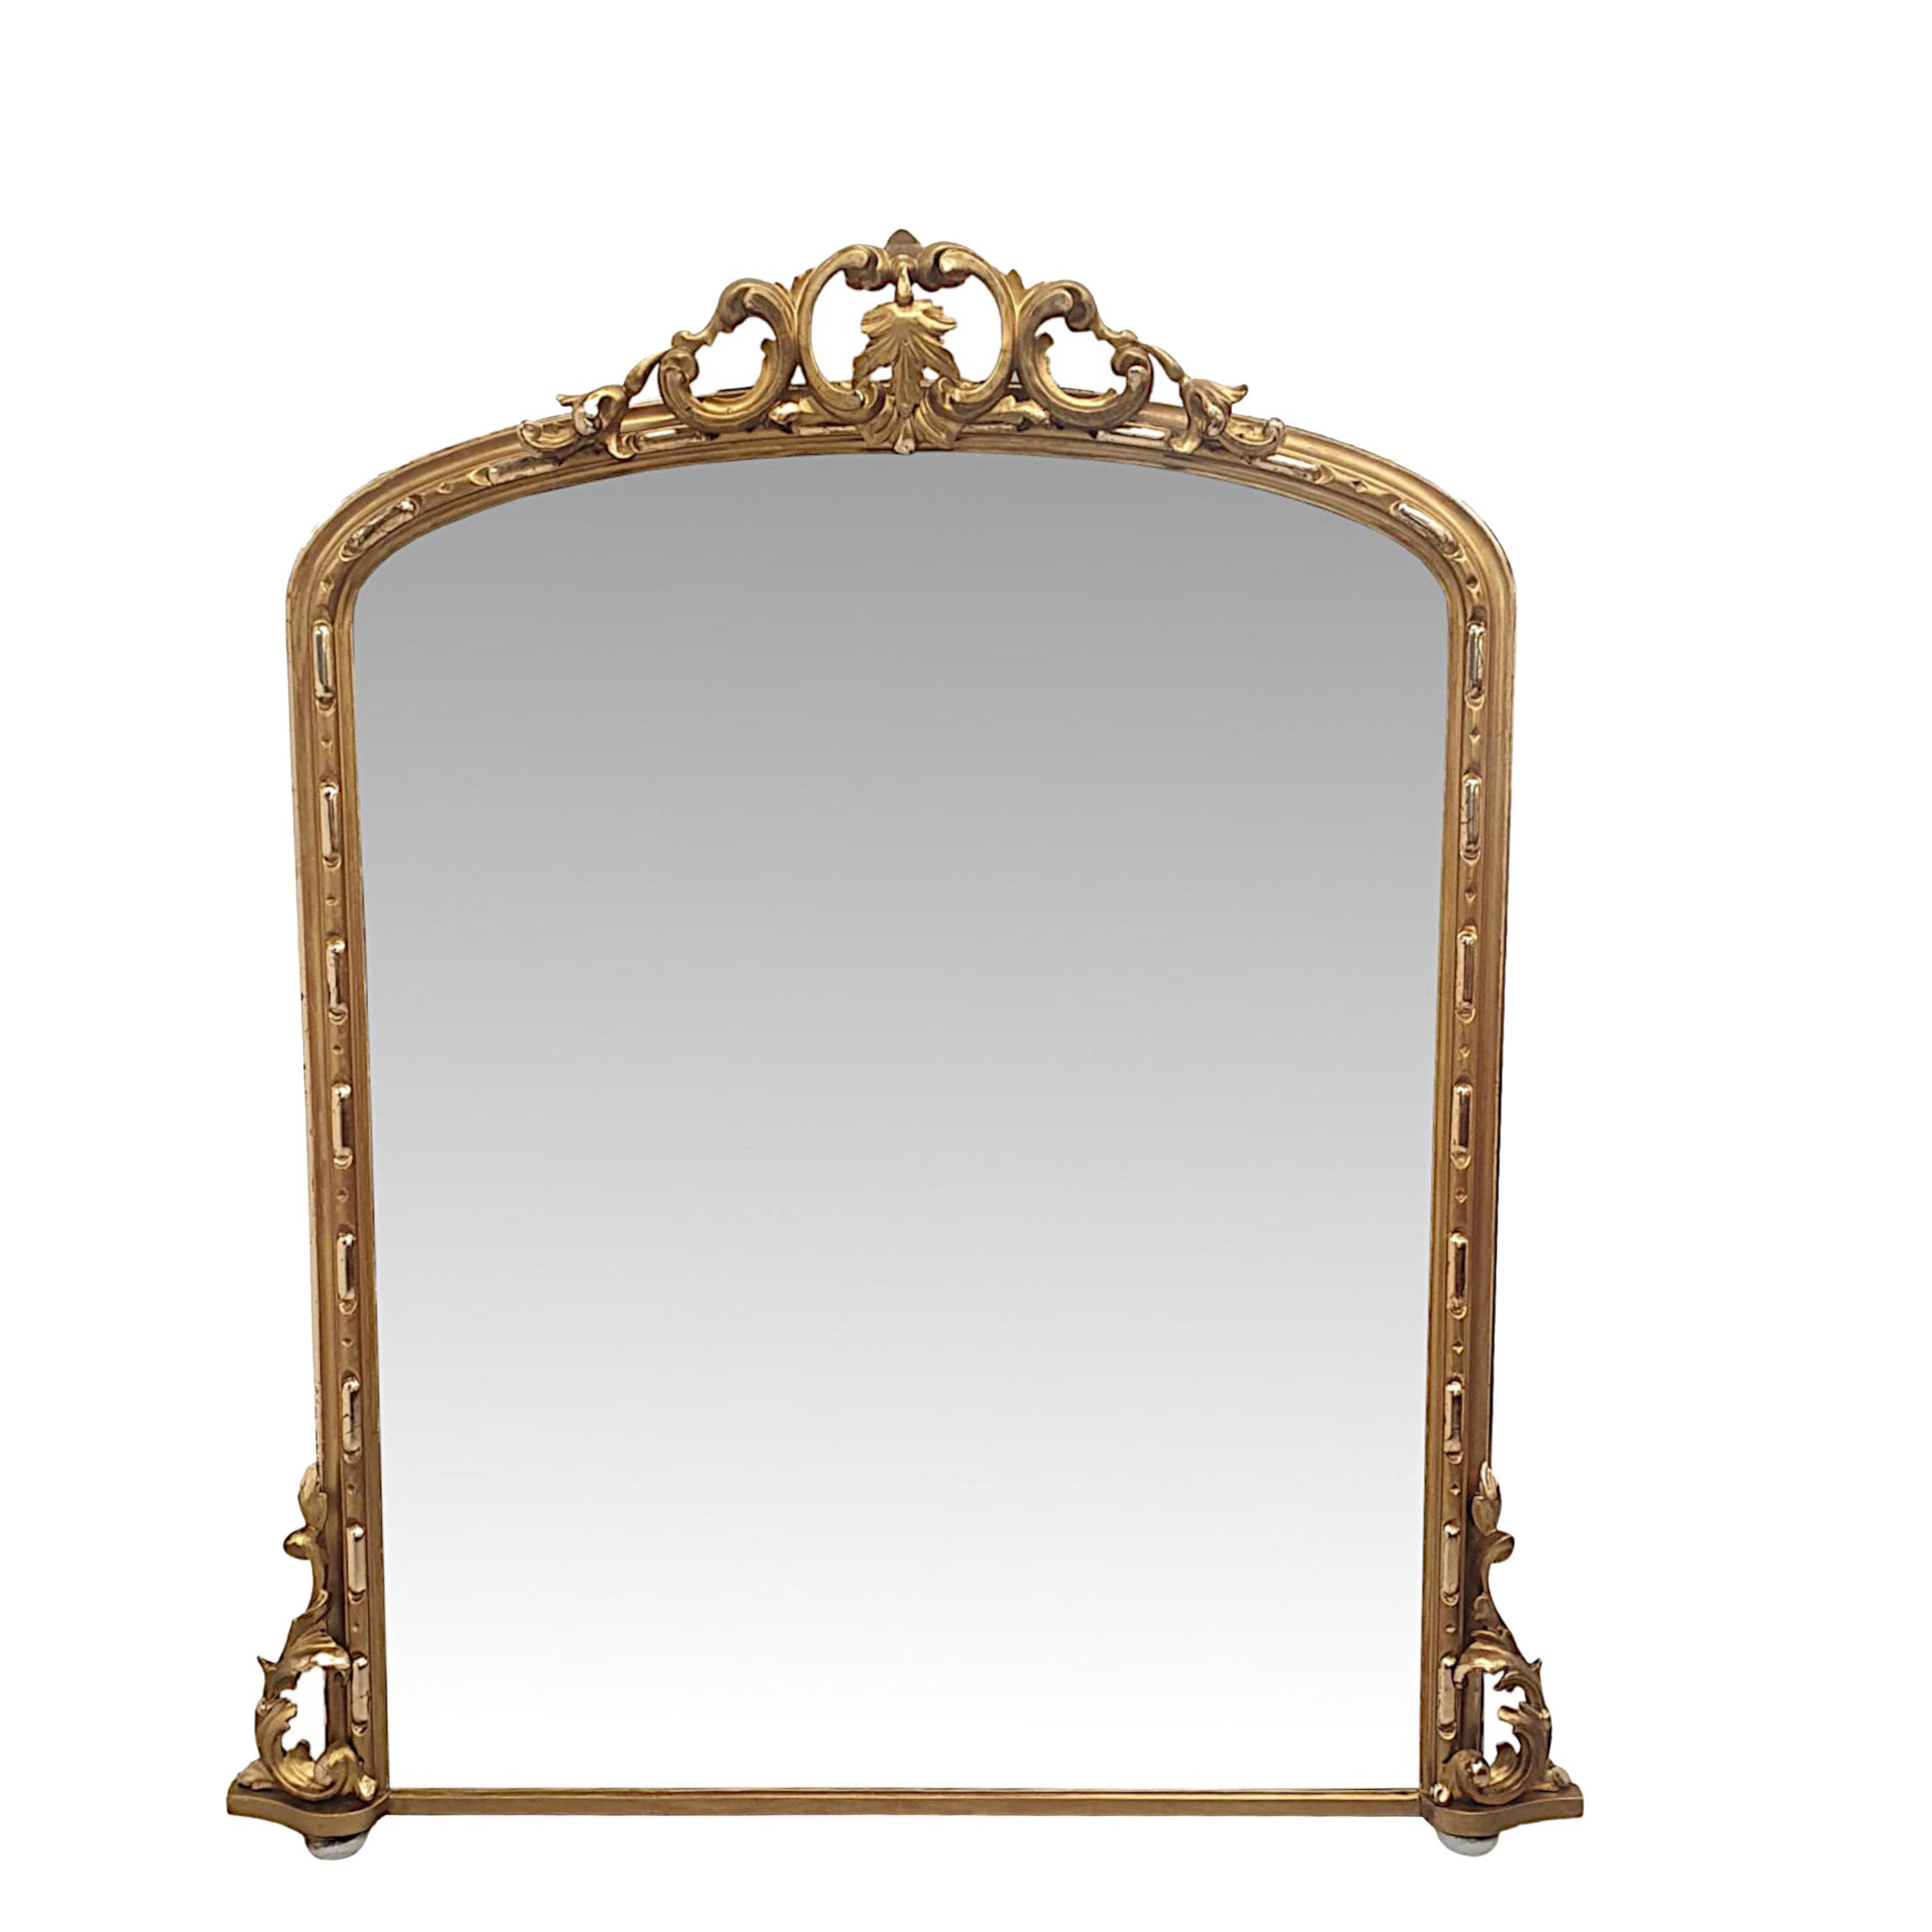 A Fabulous Large 19th Century Giltwood Overmantle Mirror